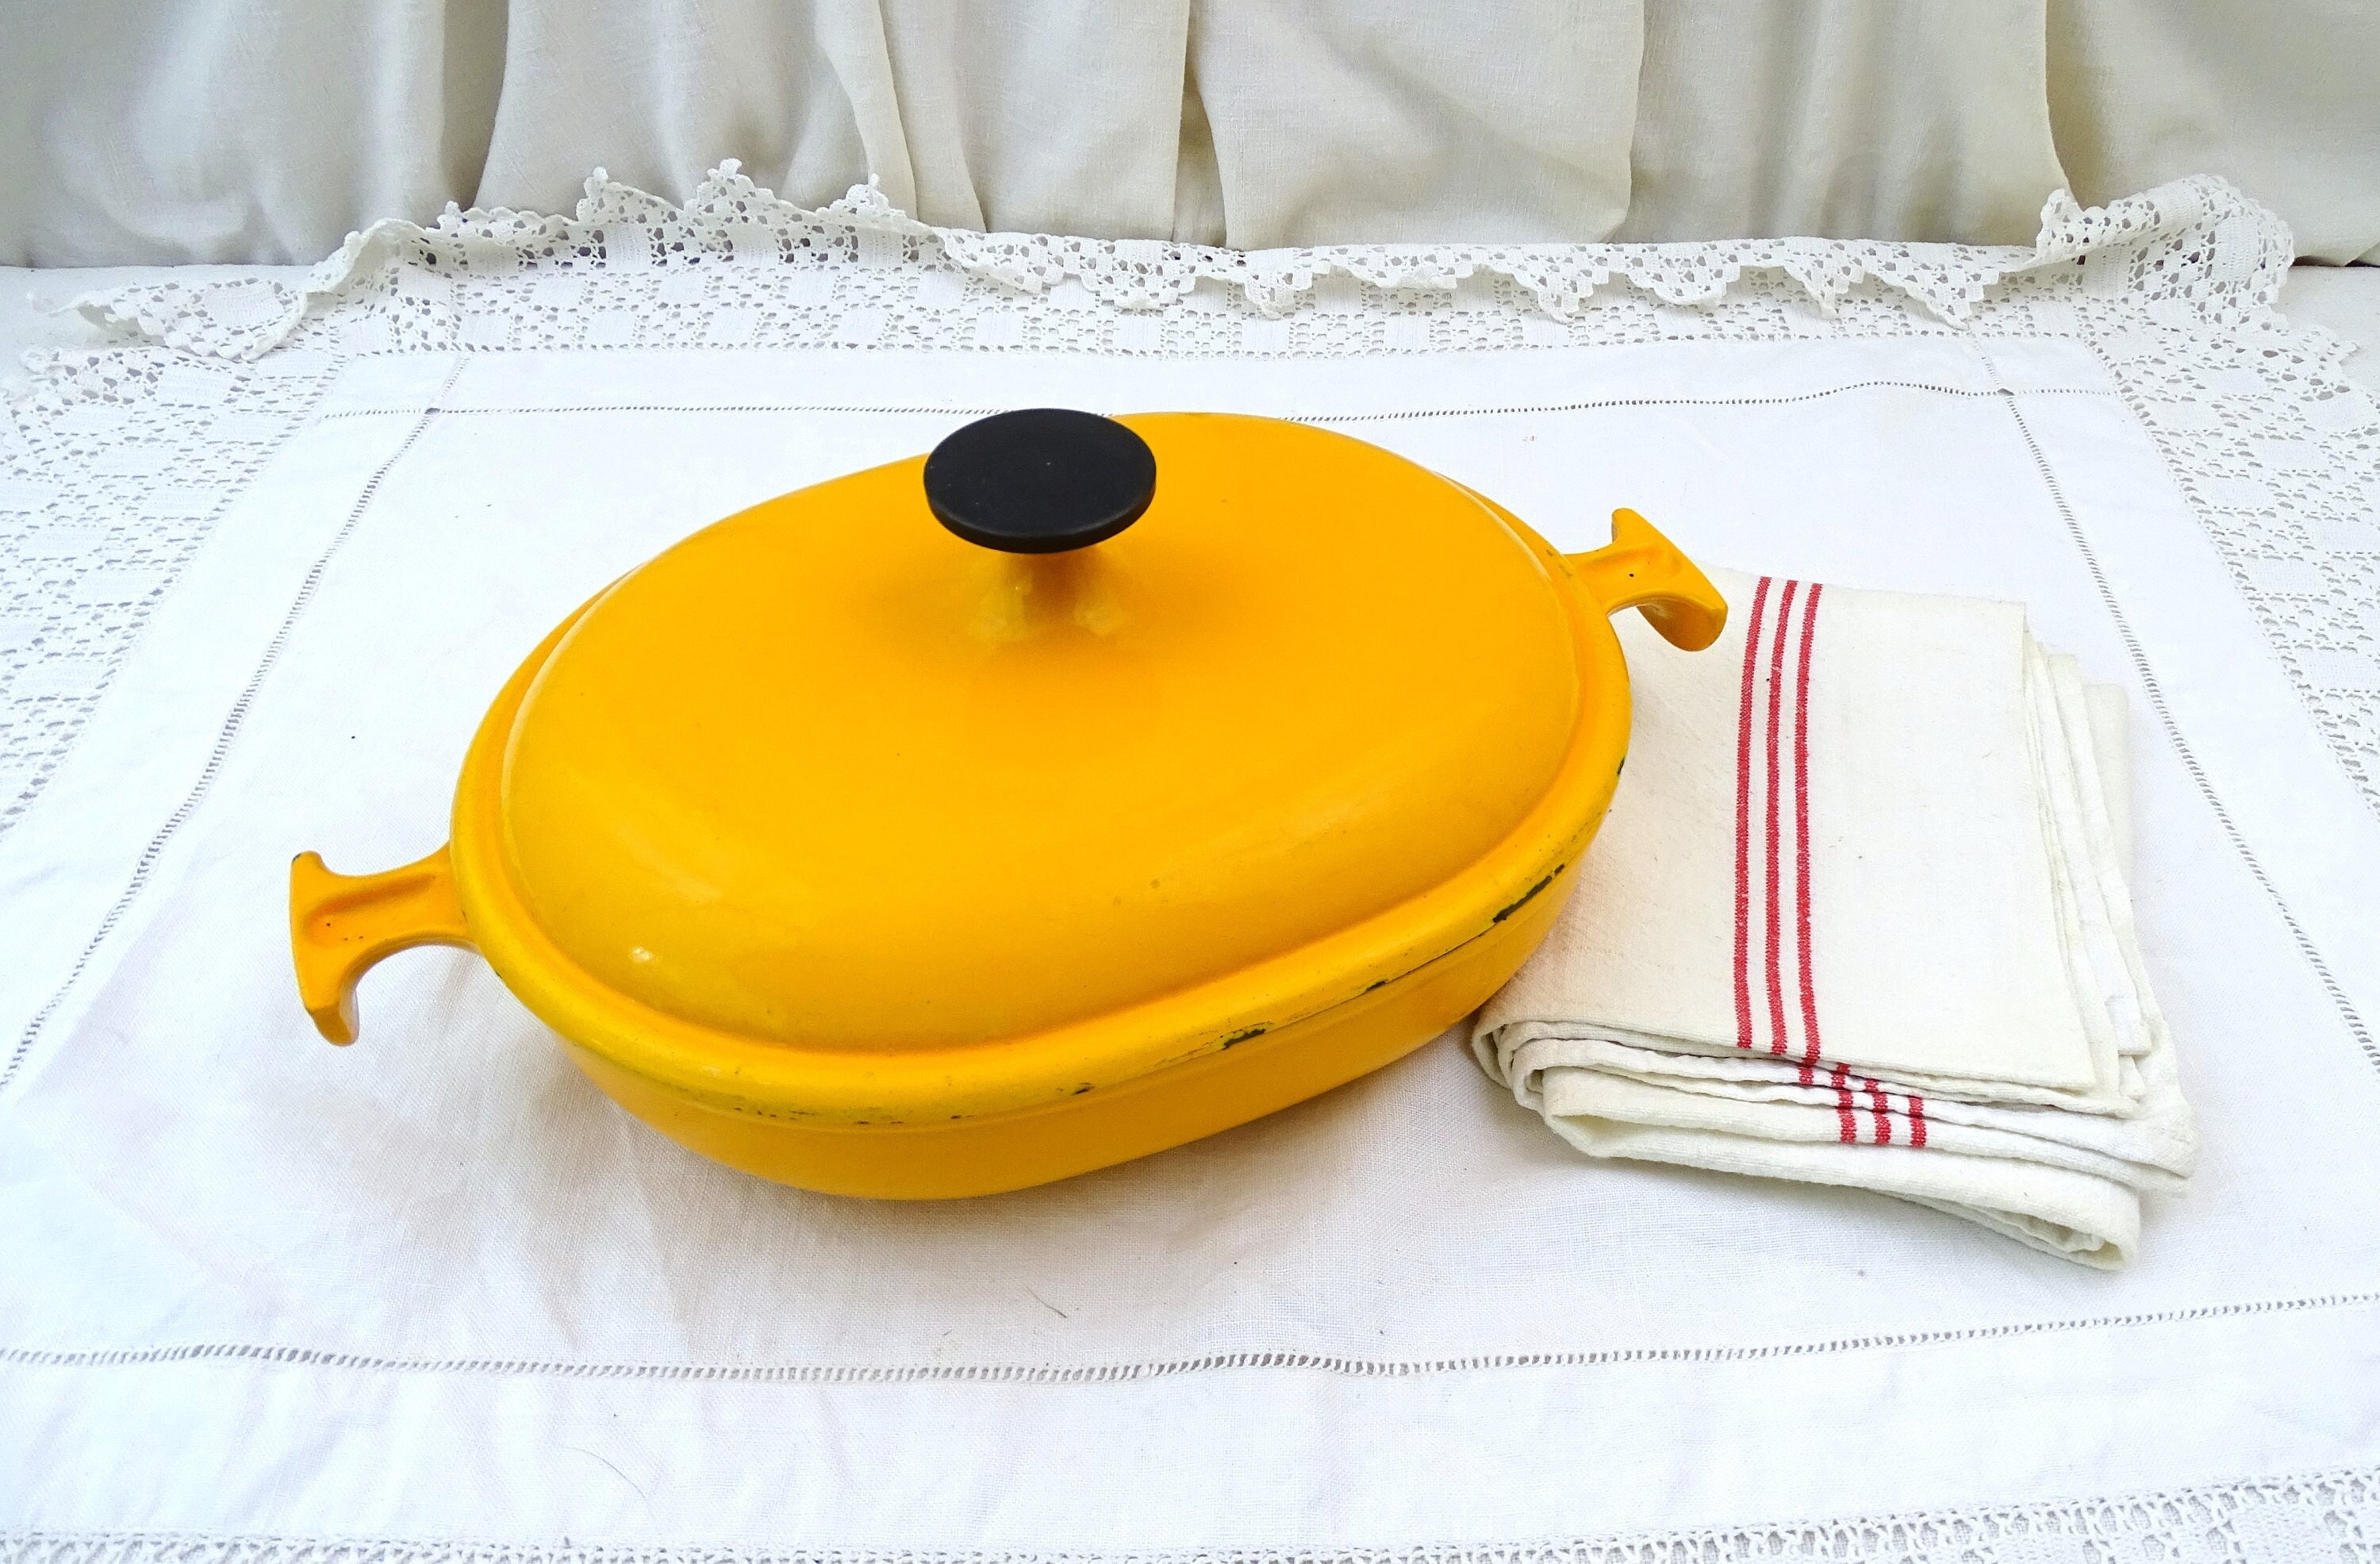 Sells Vintage Le Creuset Products – SheKnows